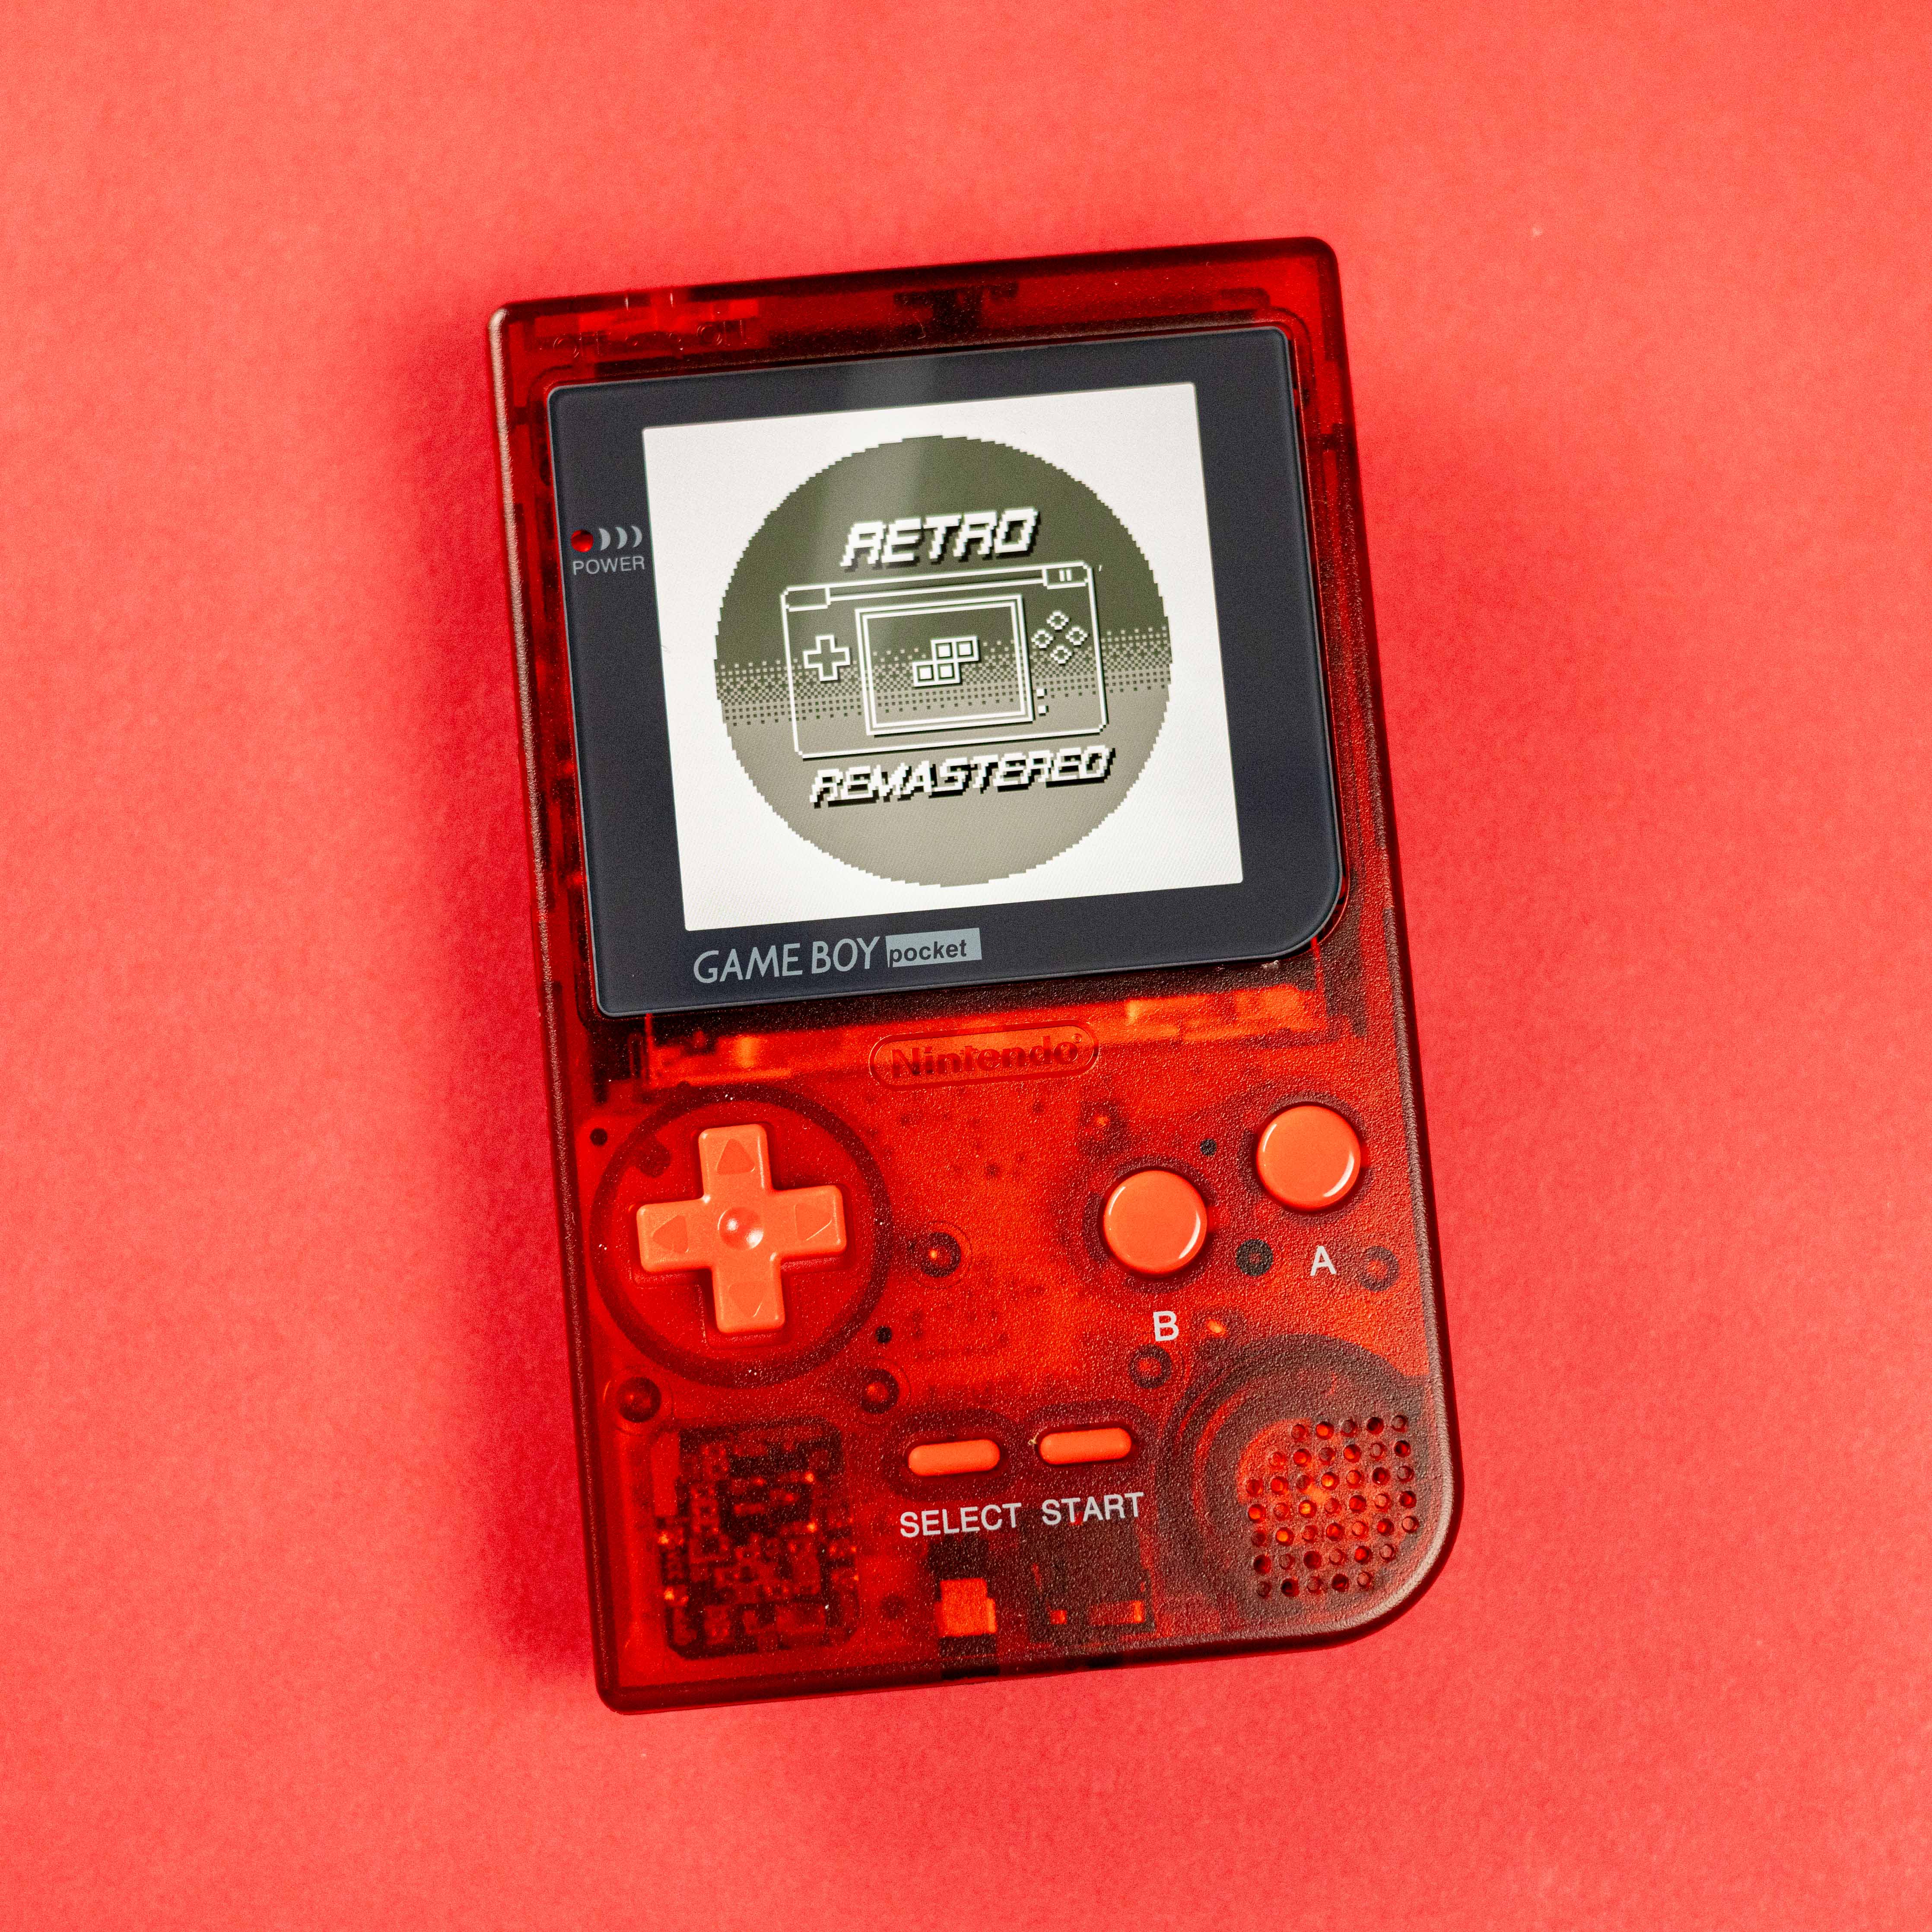 Modded Game Boy Pocket w/ IPS Display (Clear Red)